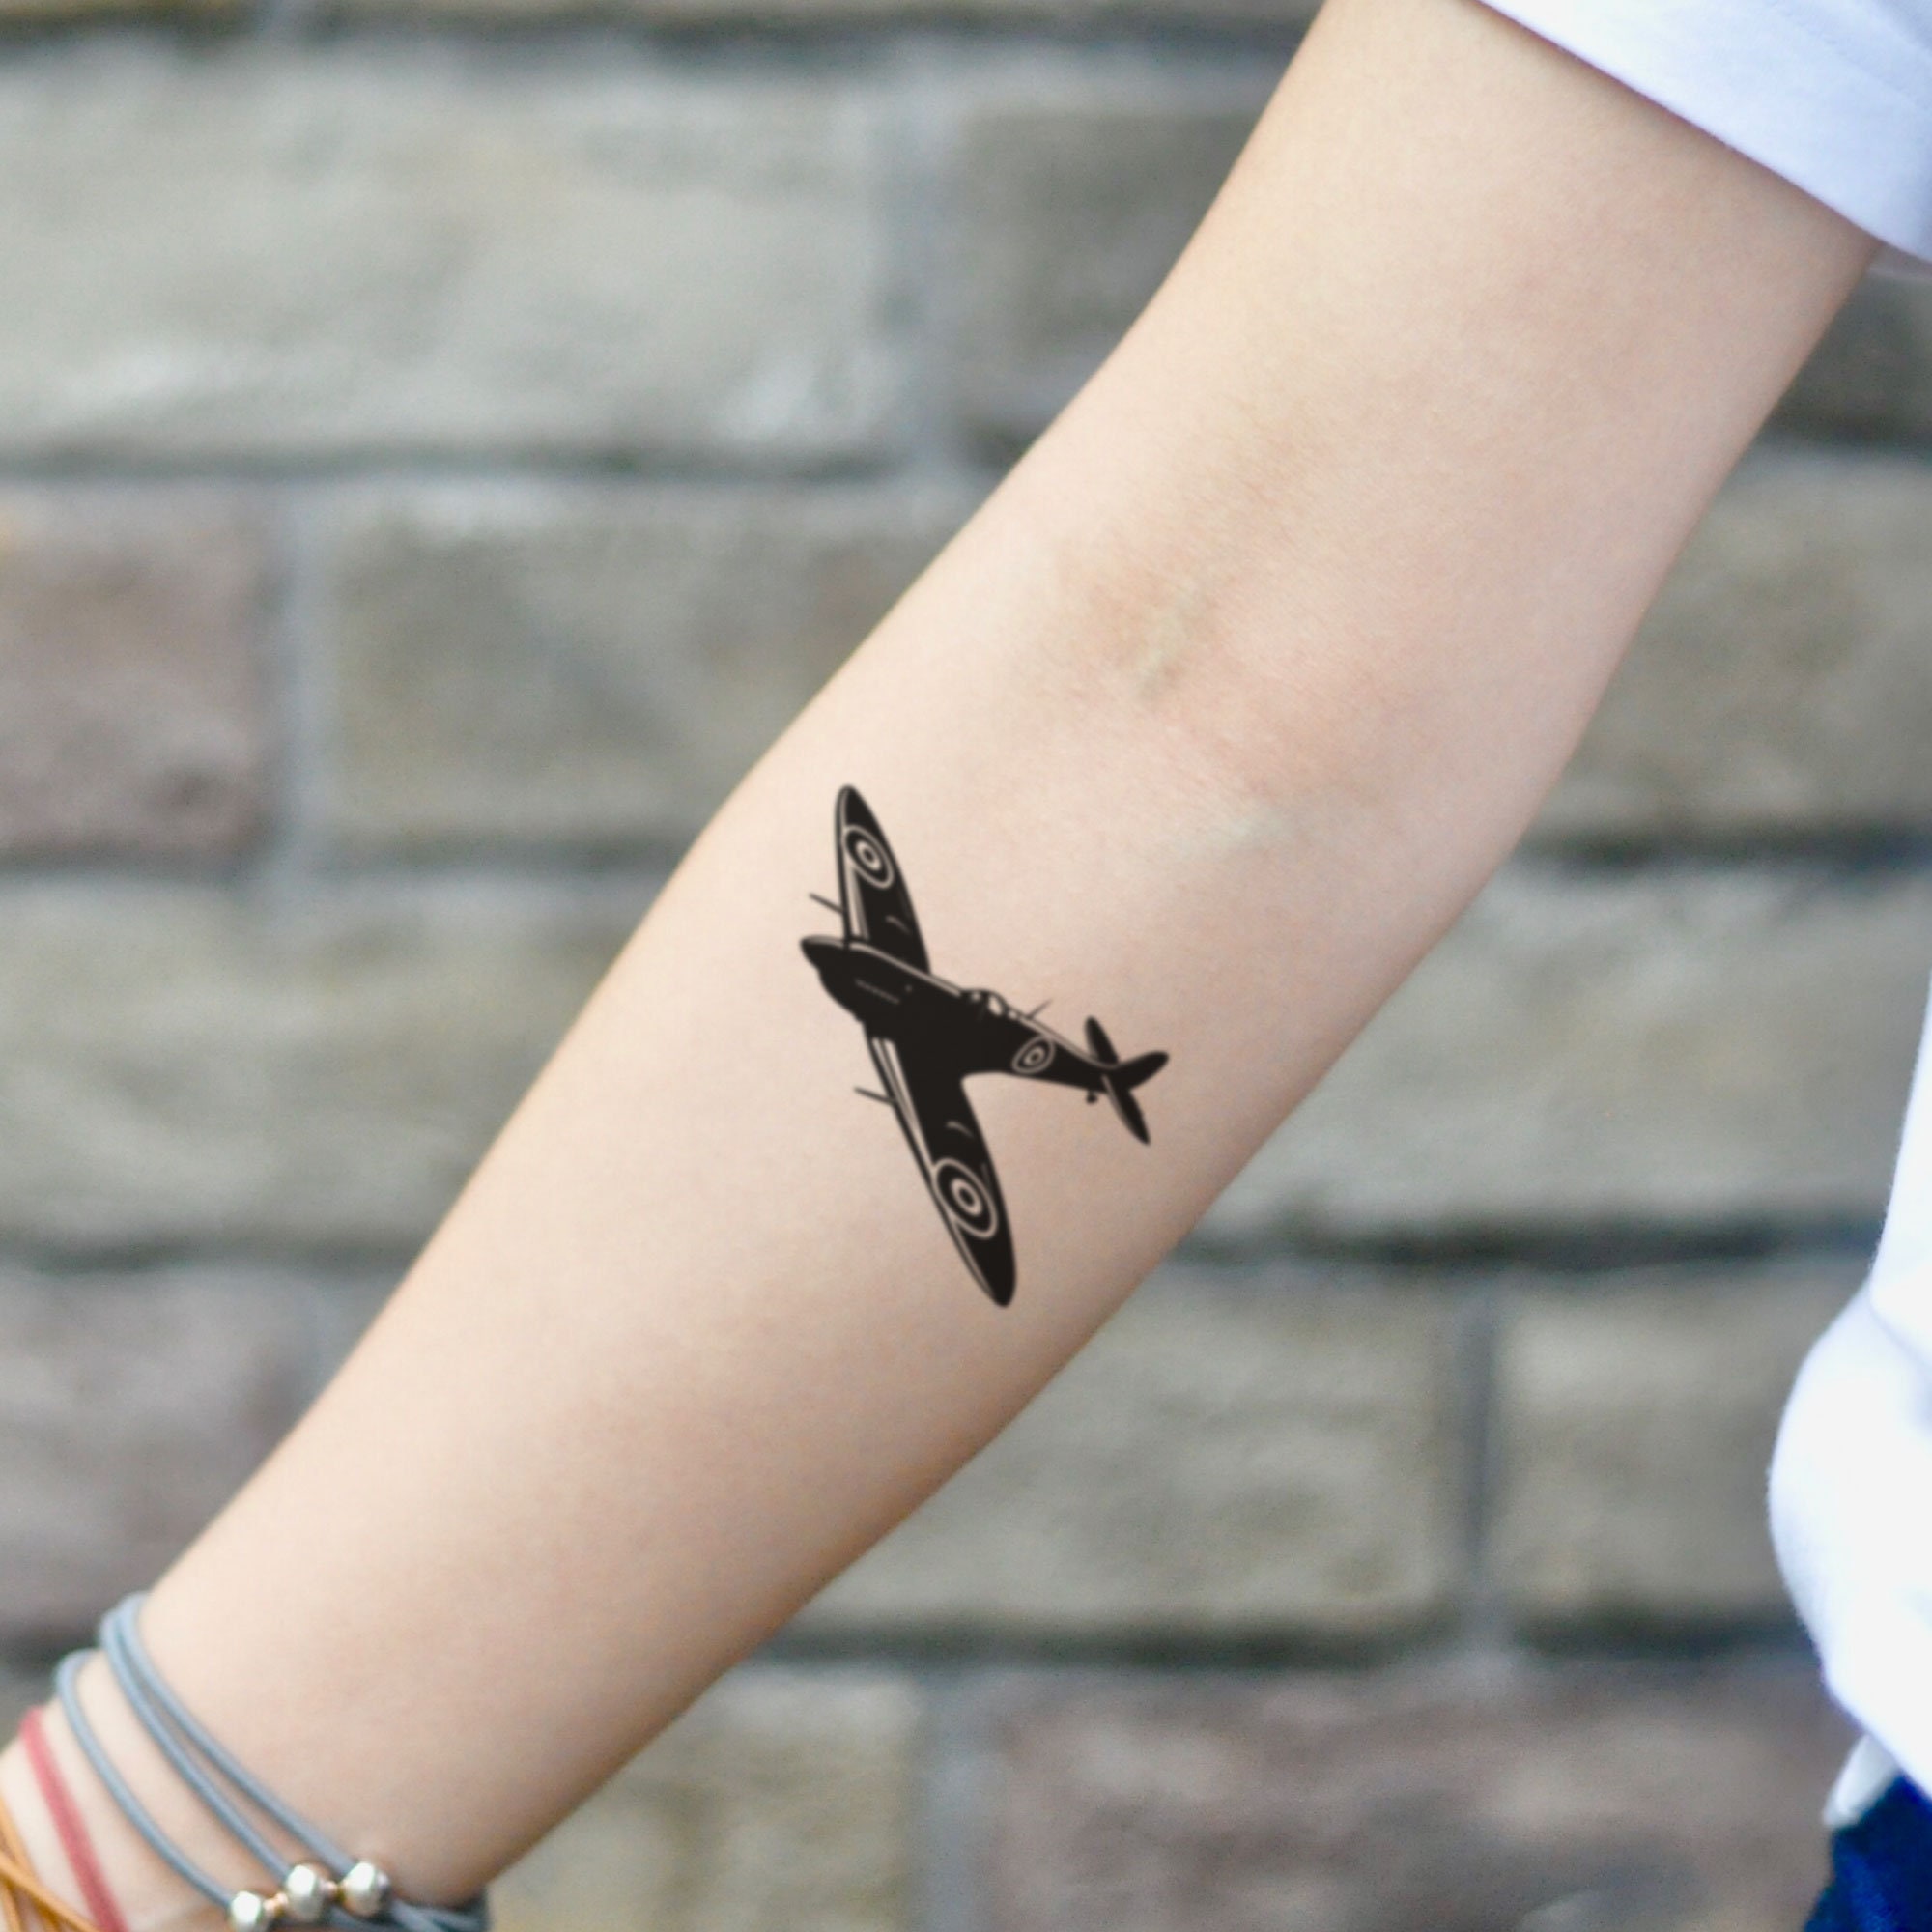 Just Go and A Tiny Paper Plane Tattoo - Typography Temporary Tattoo - Quote  Fake Sticker - Lettering Skin Decals - Minimalist Tattoo Design